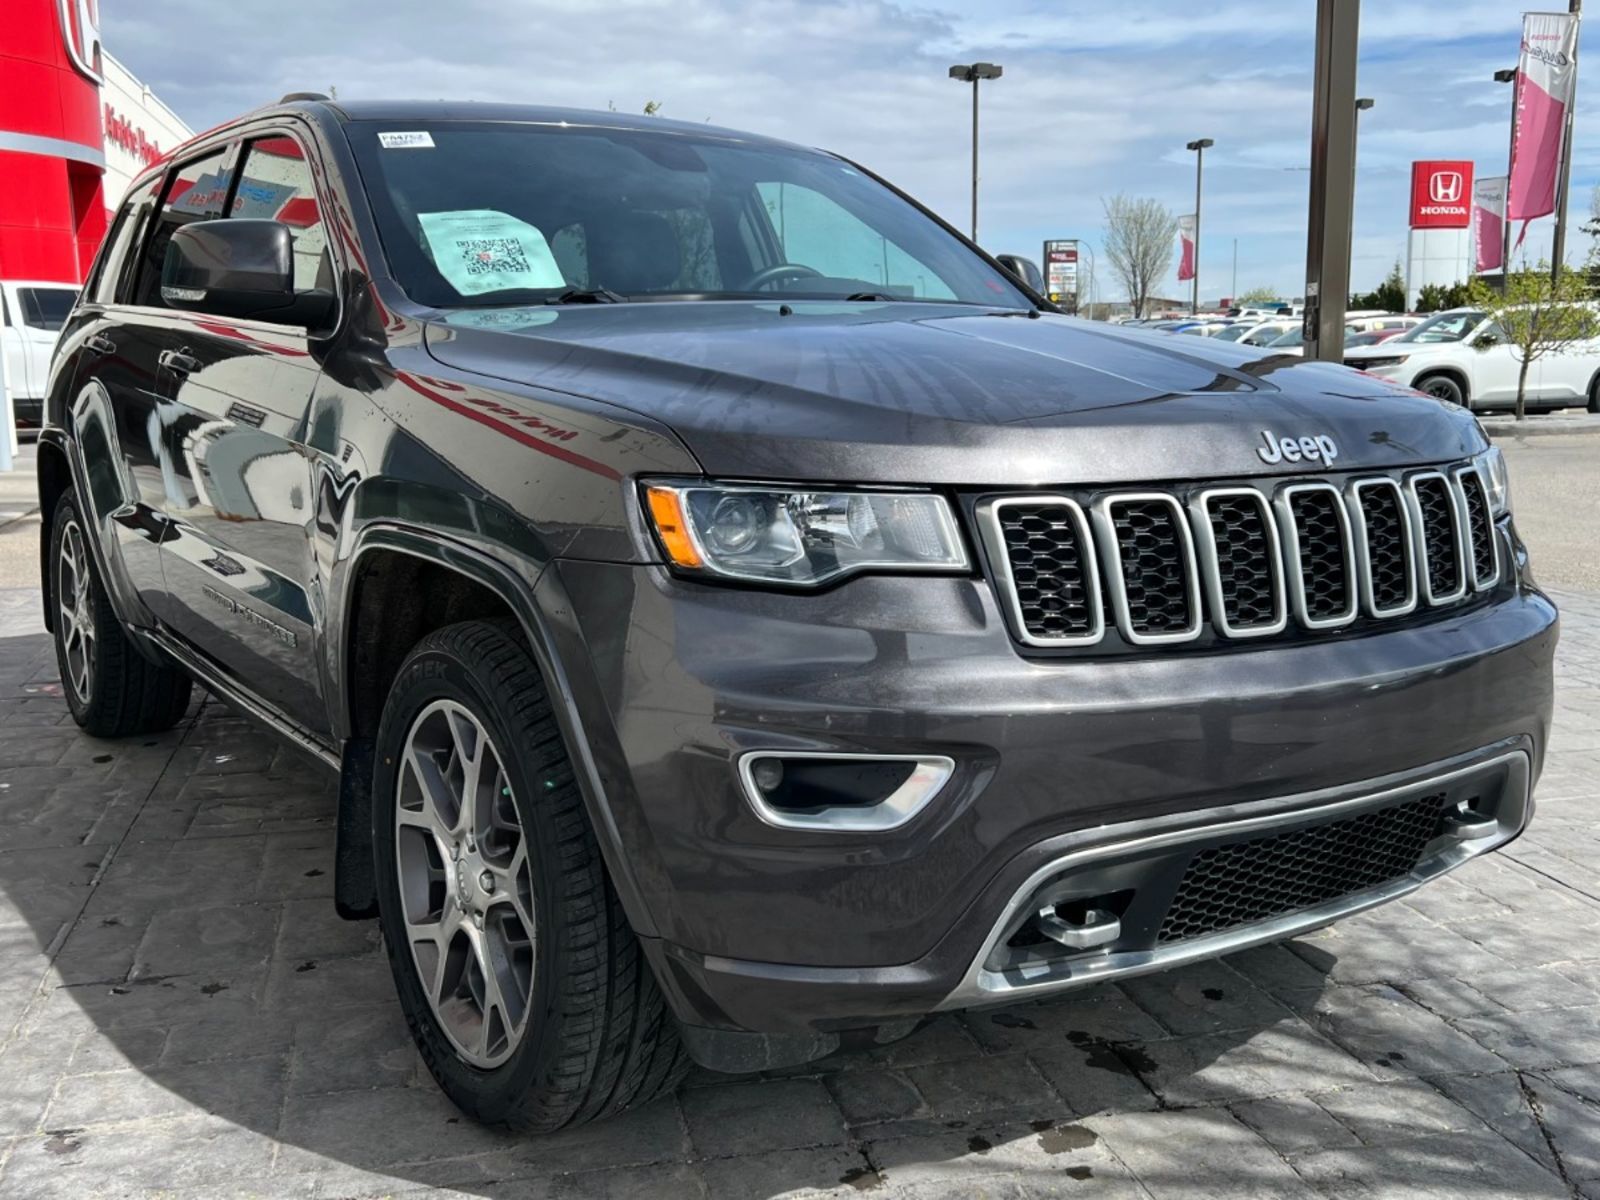 2018 Jeep Grand Cherokee LIMITED STERLING EDITION: NO ACCIDENTS, FACTORY RI